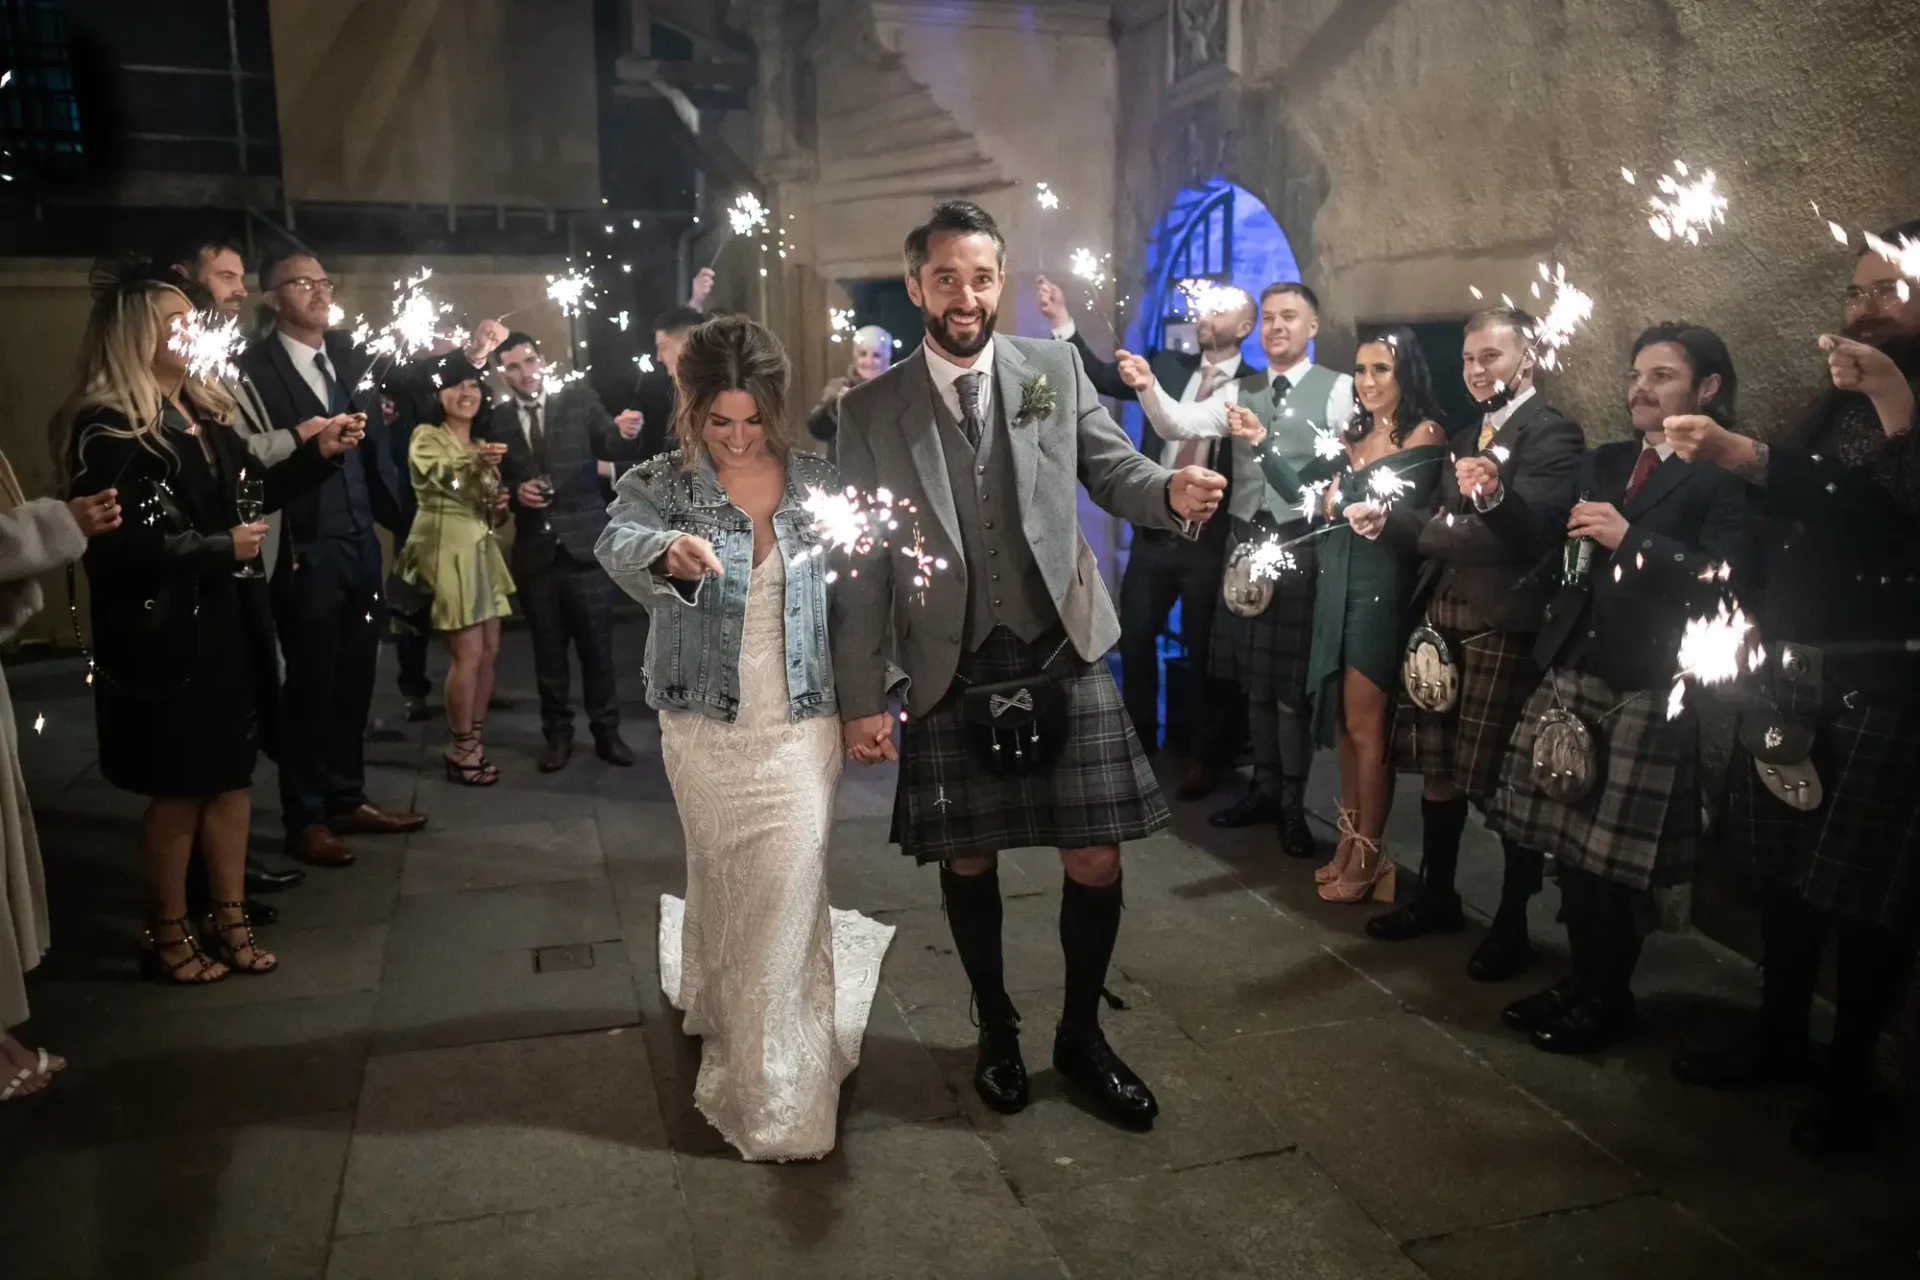 A bride and groom walk through a tunnel of guests holding sparklers, the groom in a kilt and the bride in a denim jacket.